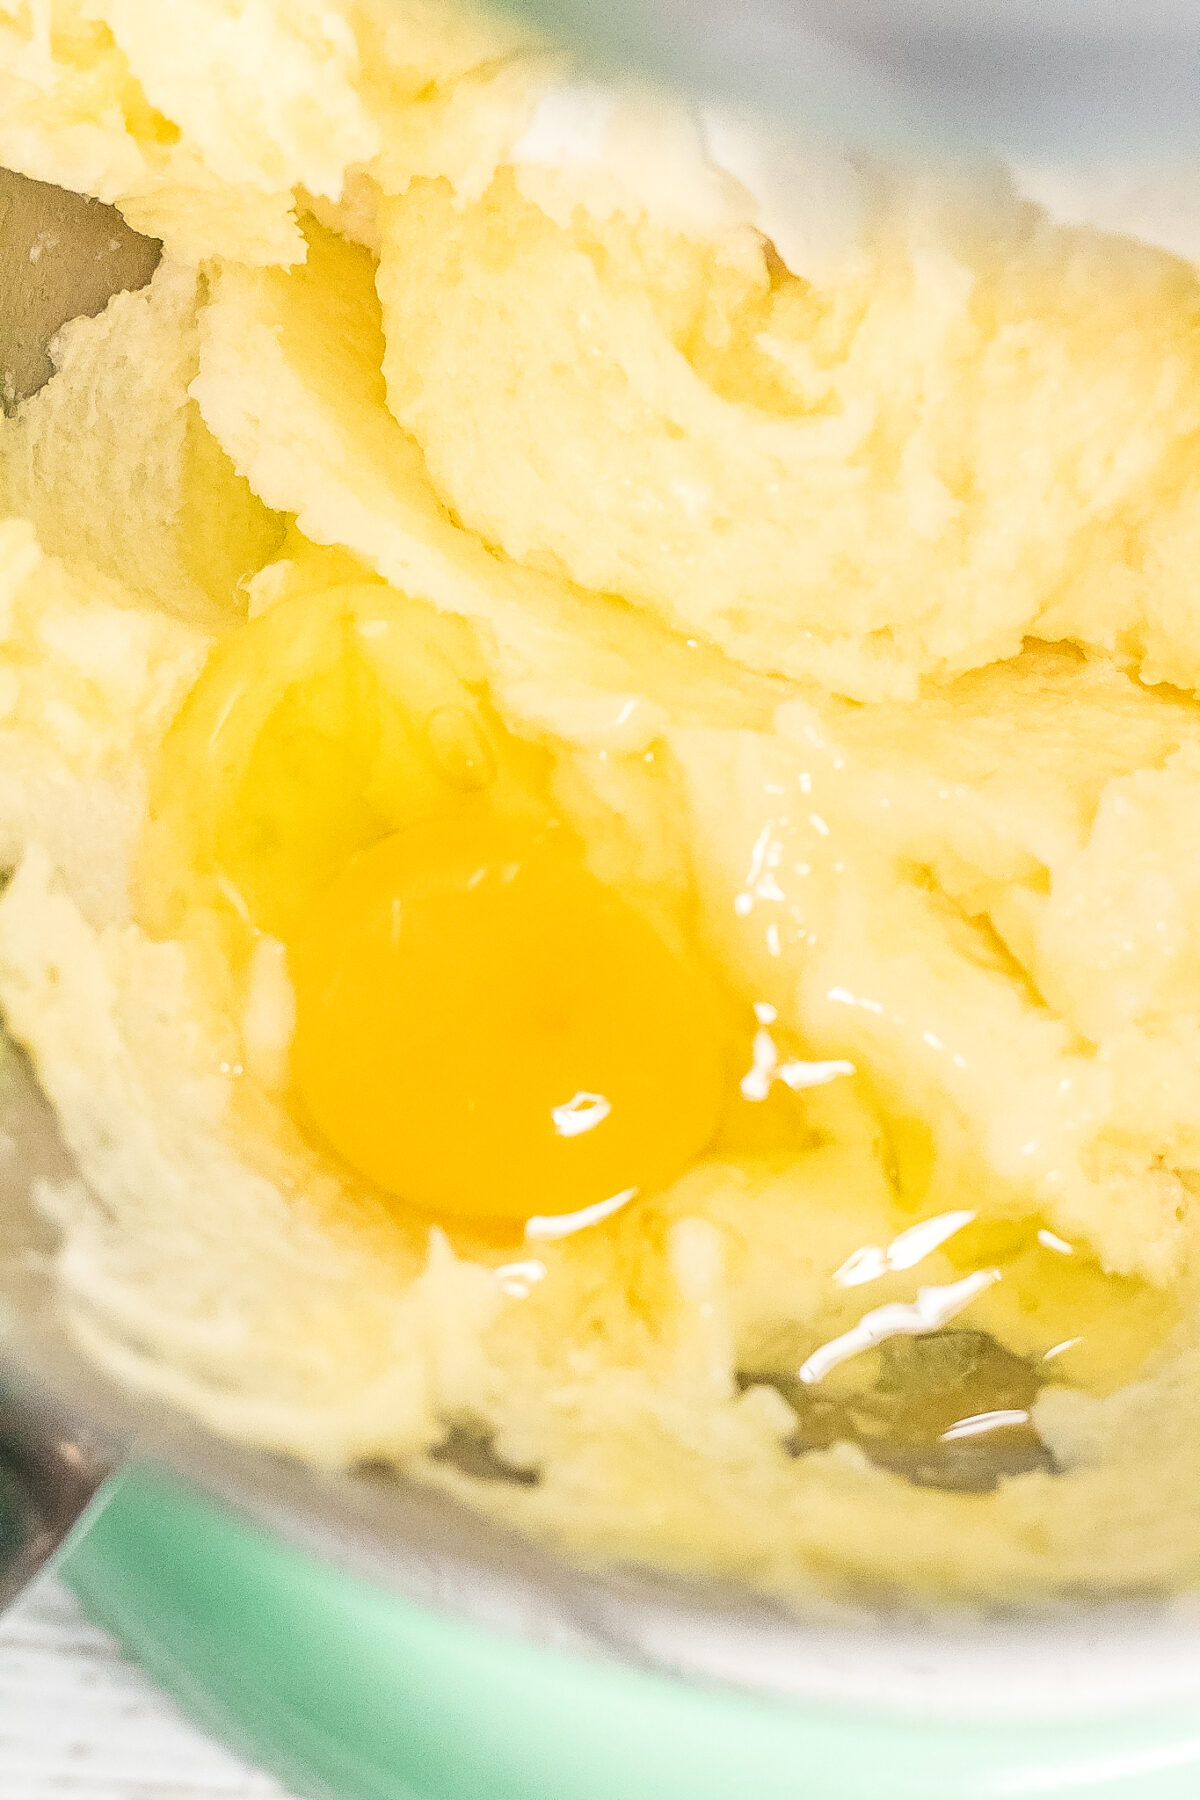 Mixing Eggs into the butter and sugar.